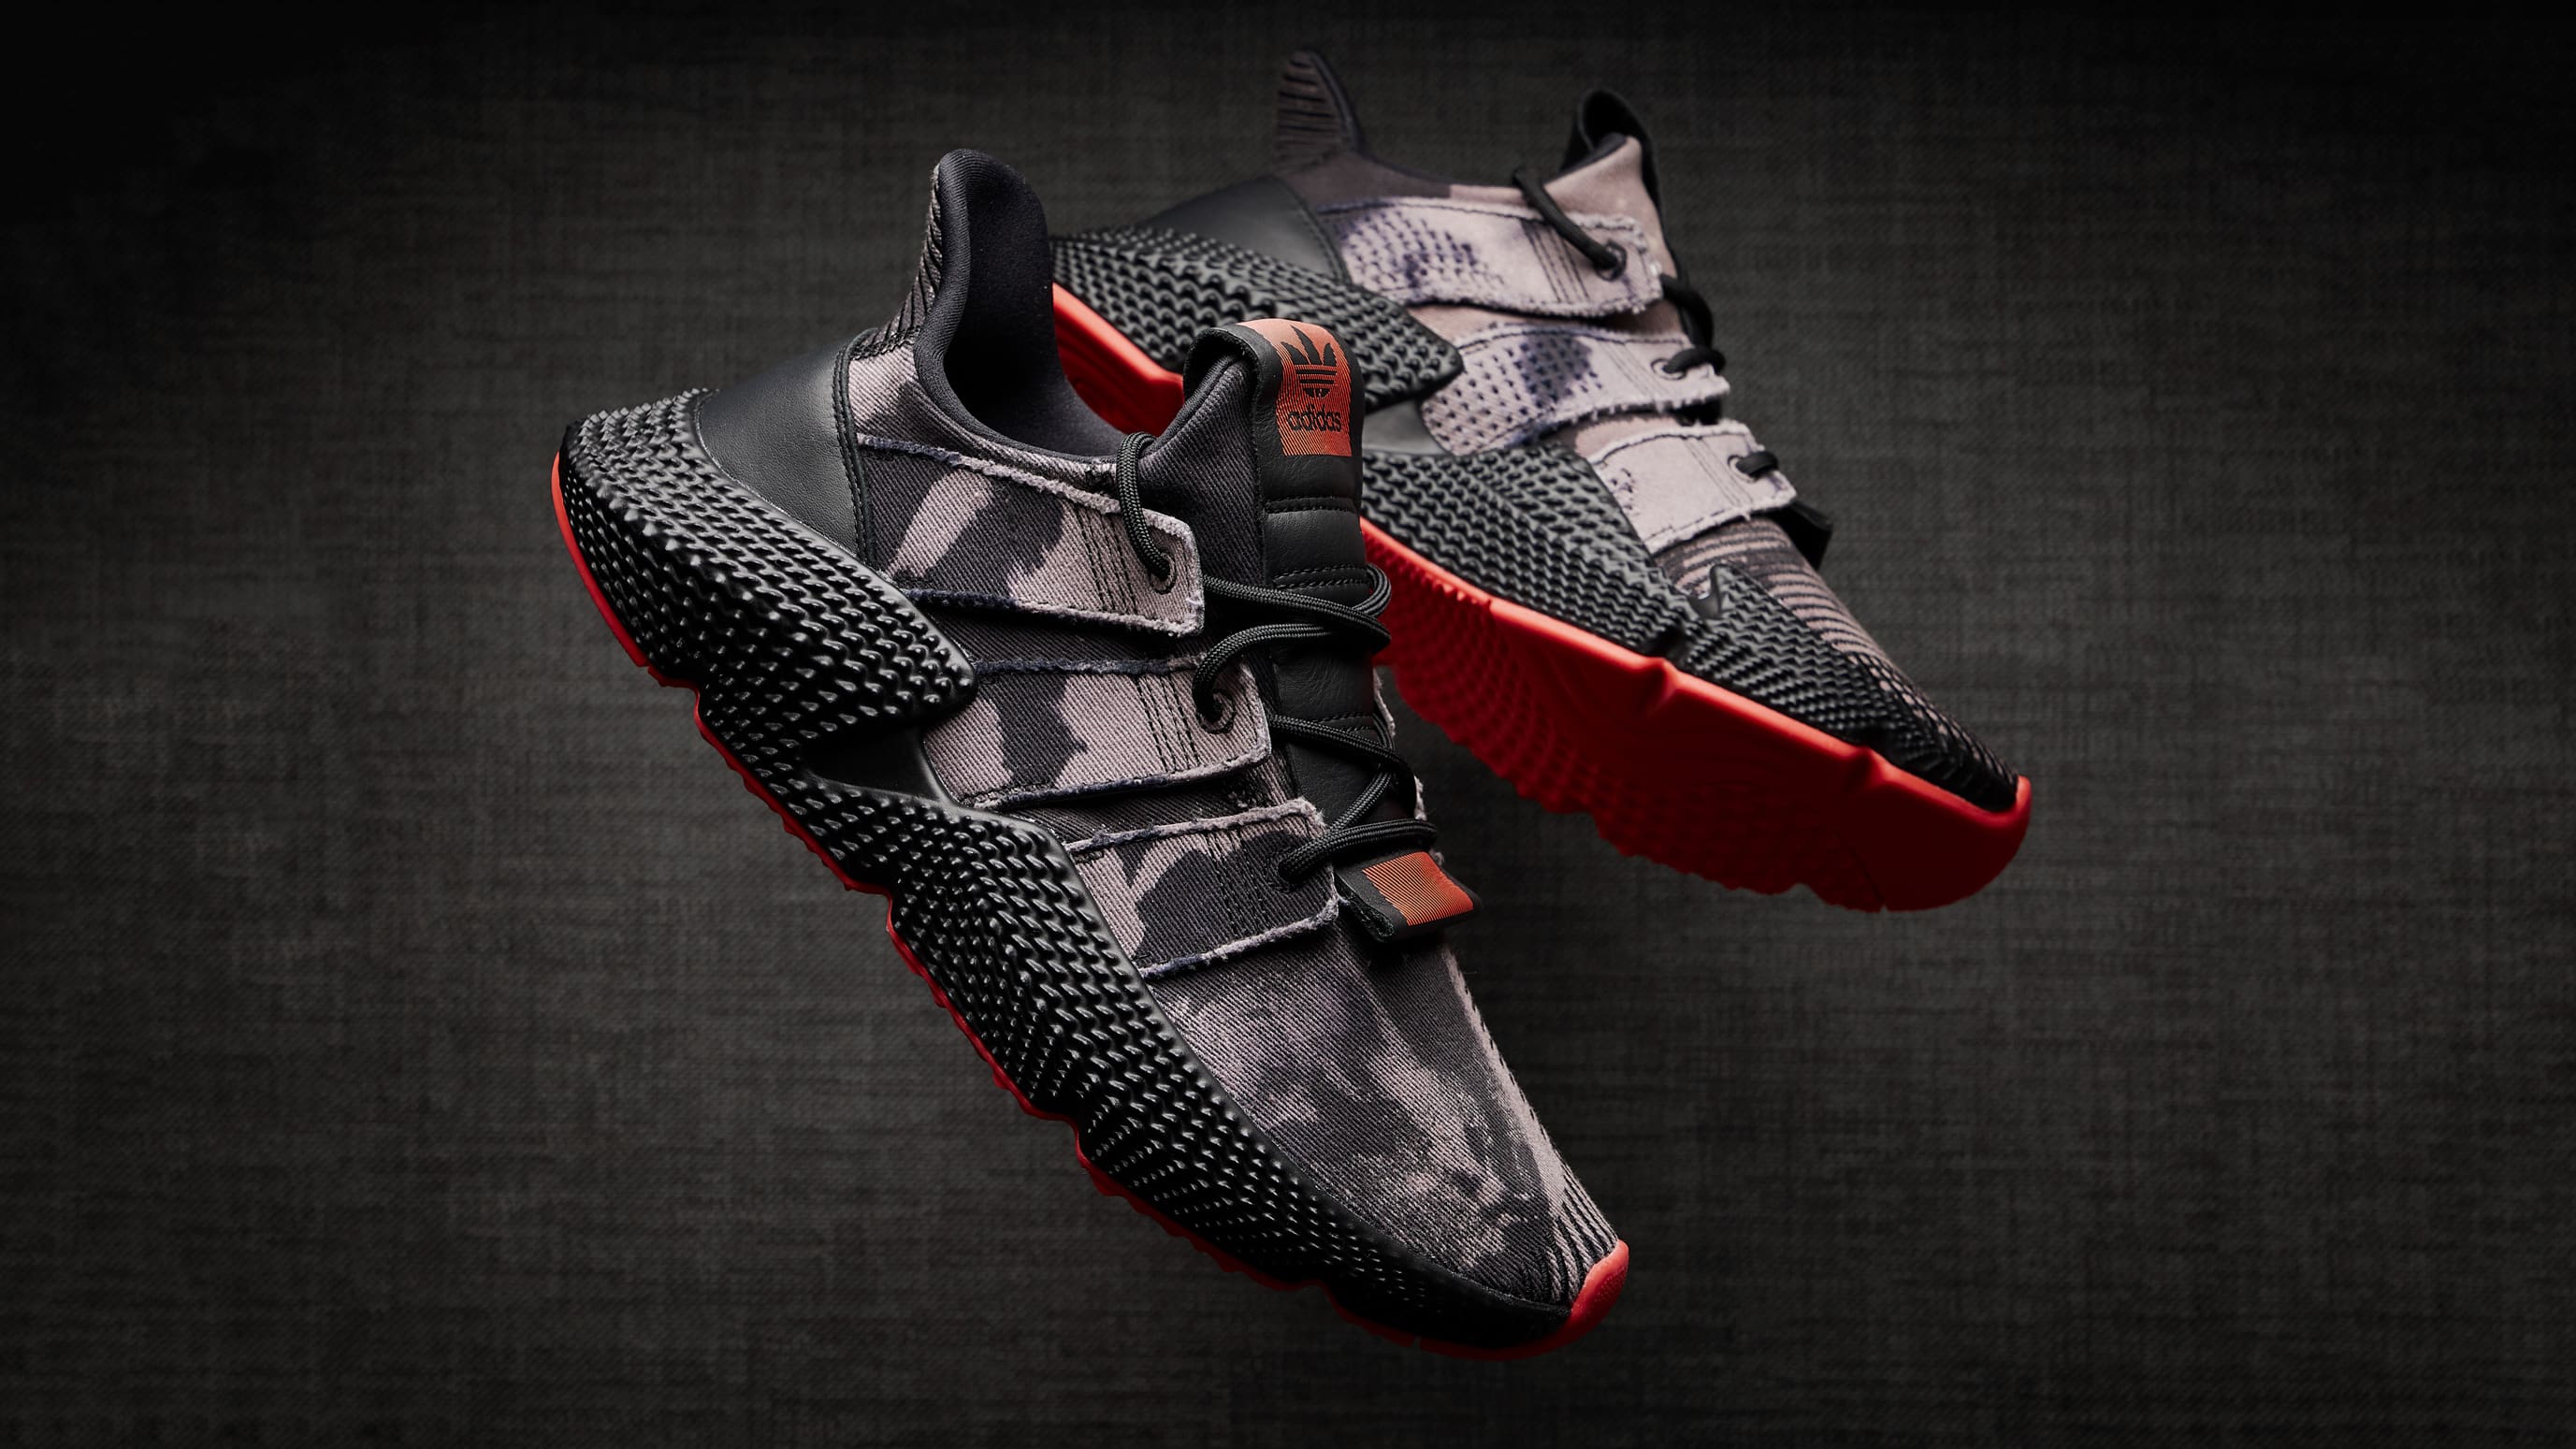 MoreSneakers.com on Twitter: "Adidas Prophere Core Black/Solar Red from Midnight CET =&gt;https://t.co/pXhVvLzxpX https://t.co/EWsqFTsBOQ" / Twitter